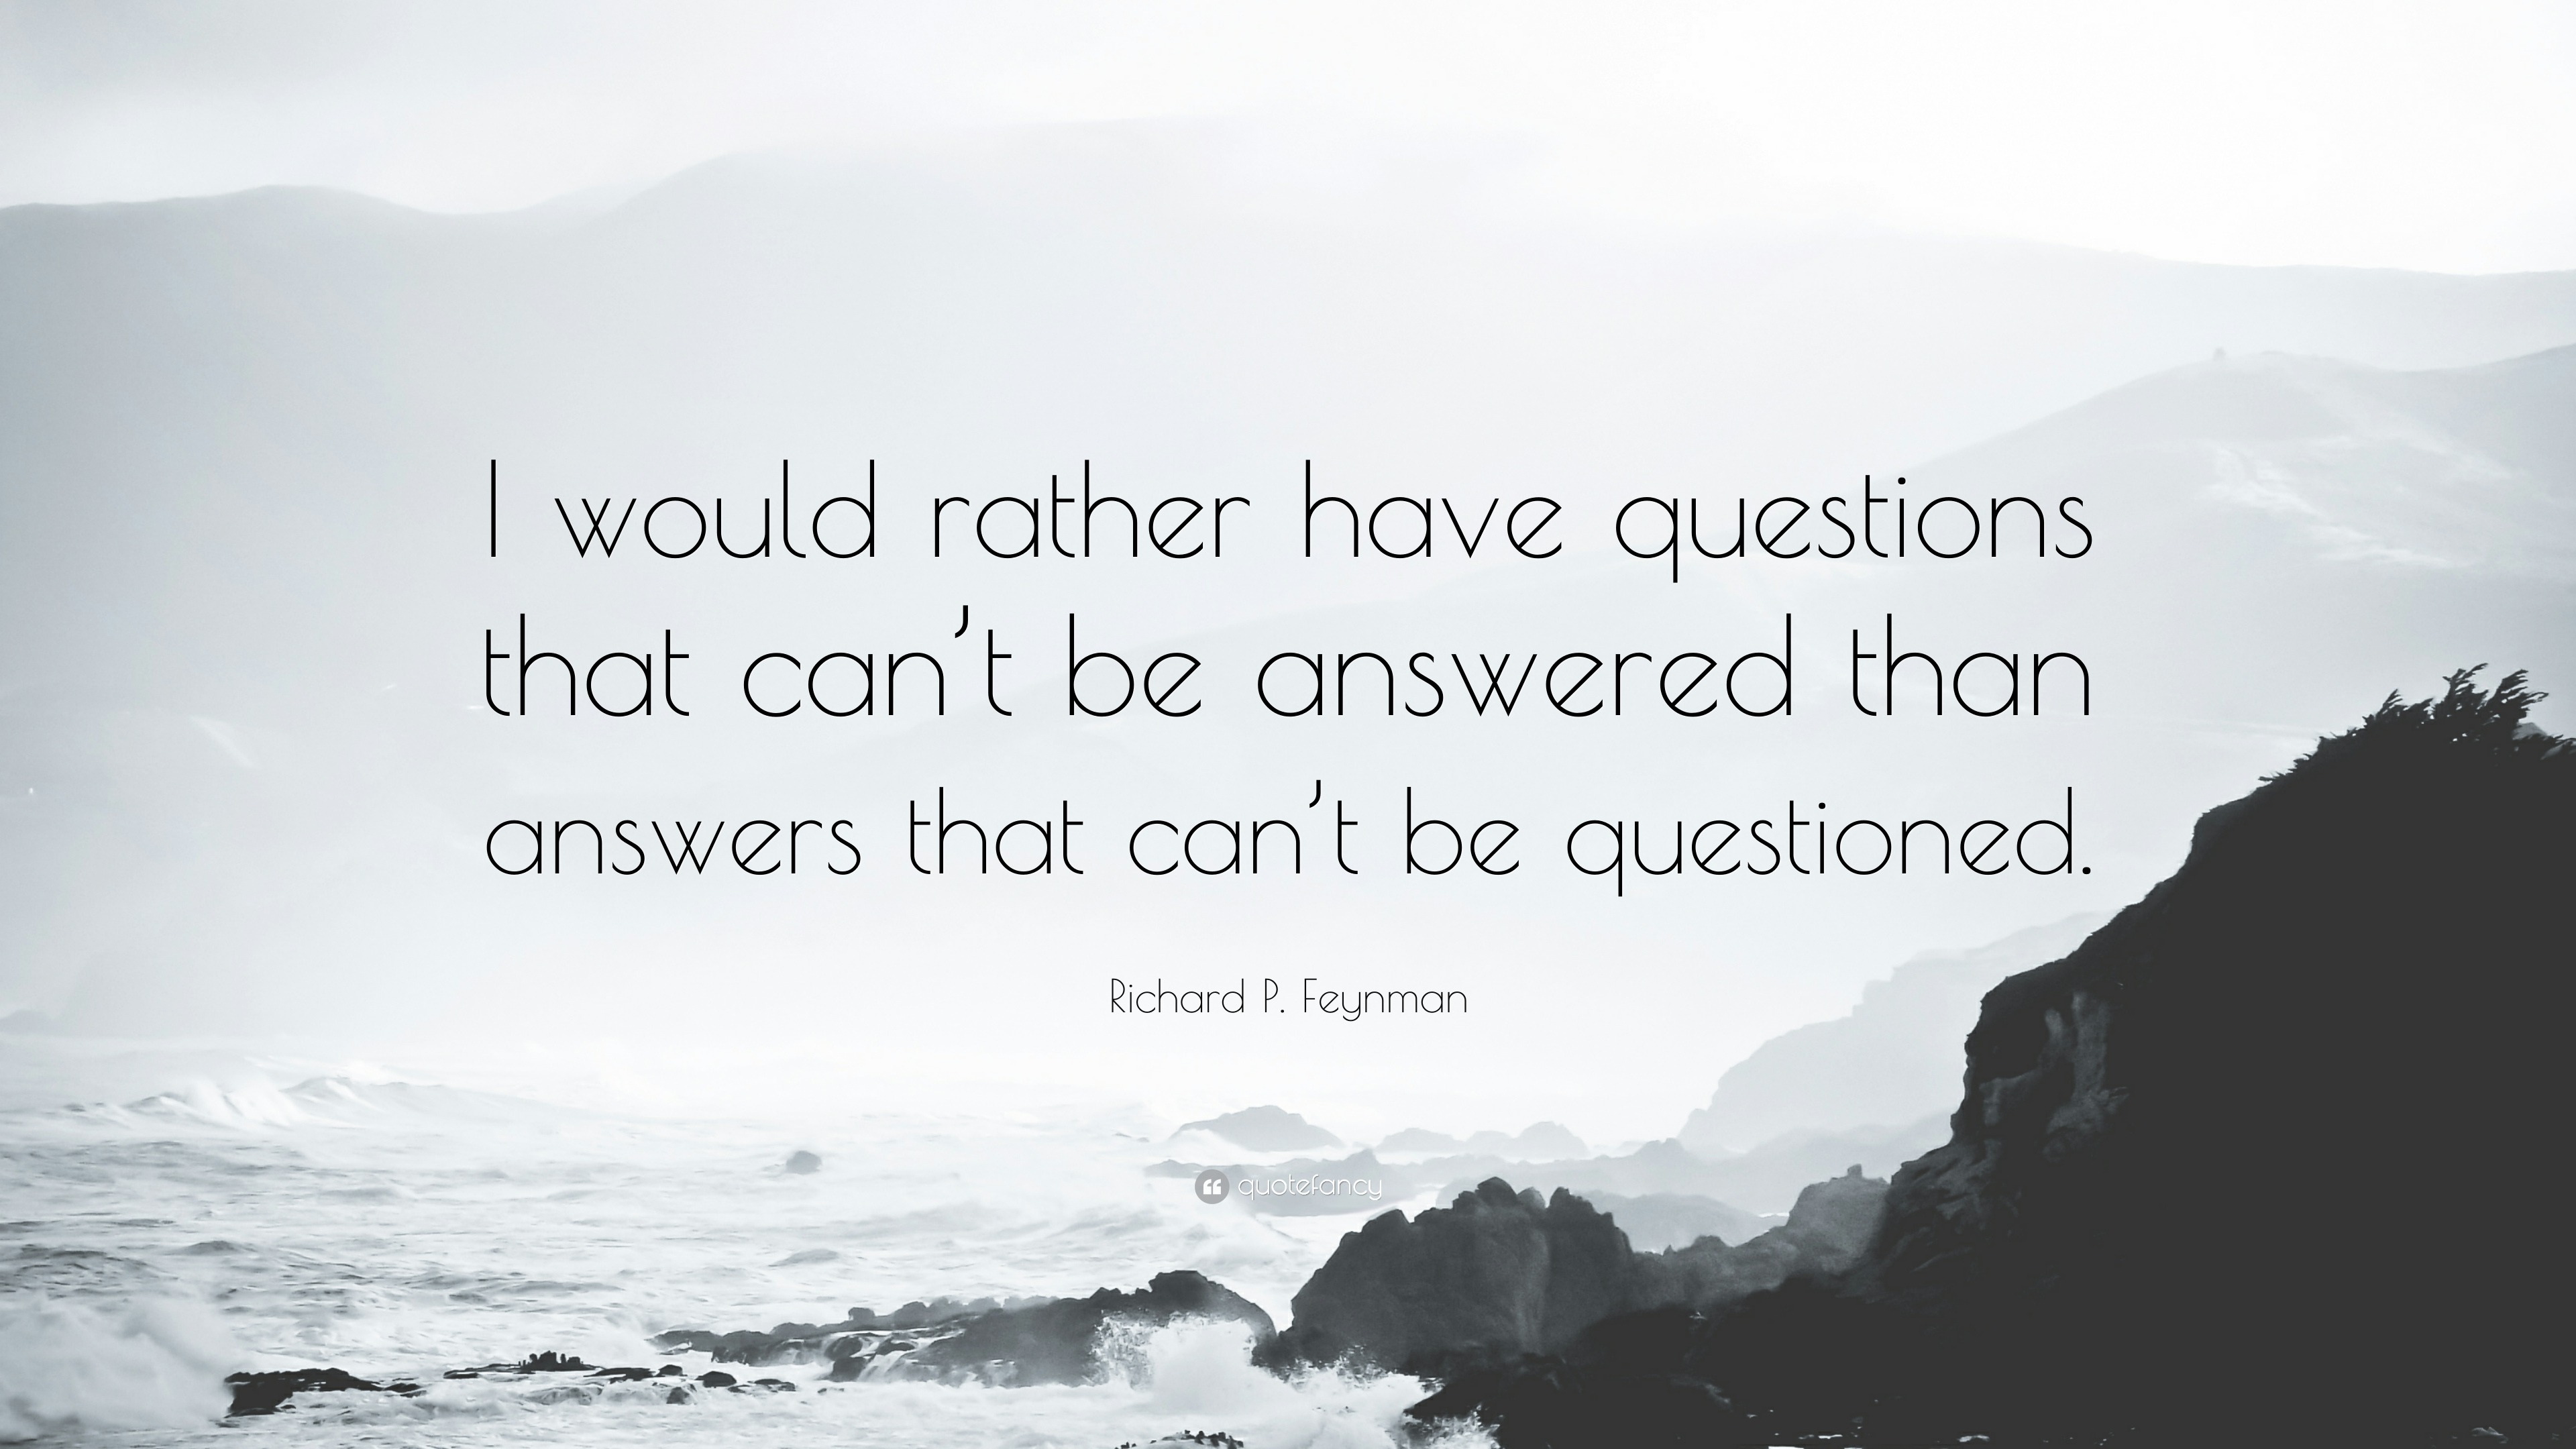 Richard P. Feynman Quote: “I would rather have questions that can’t be